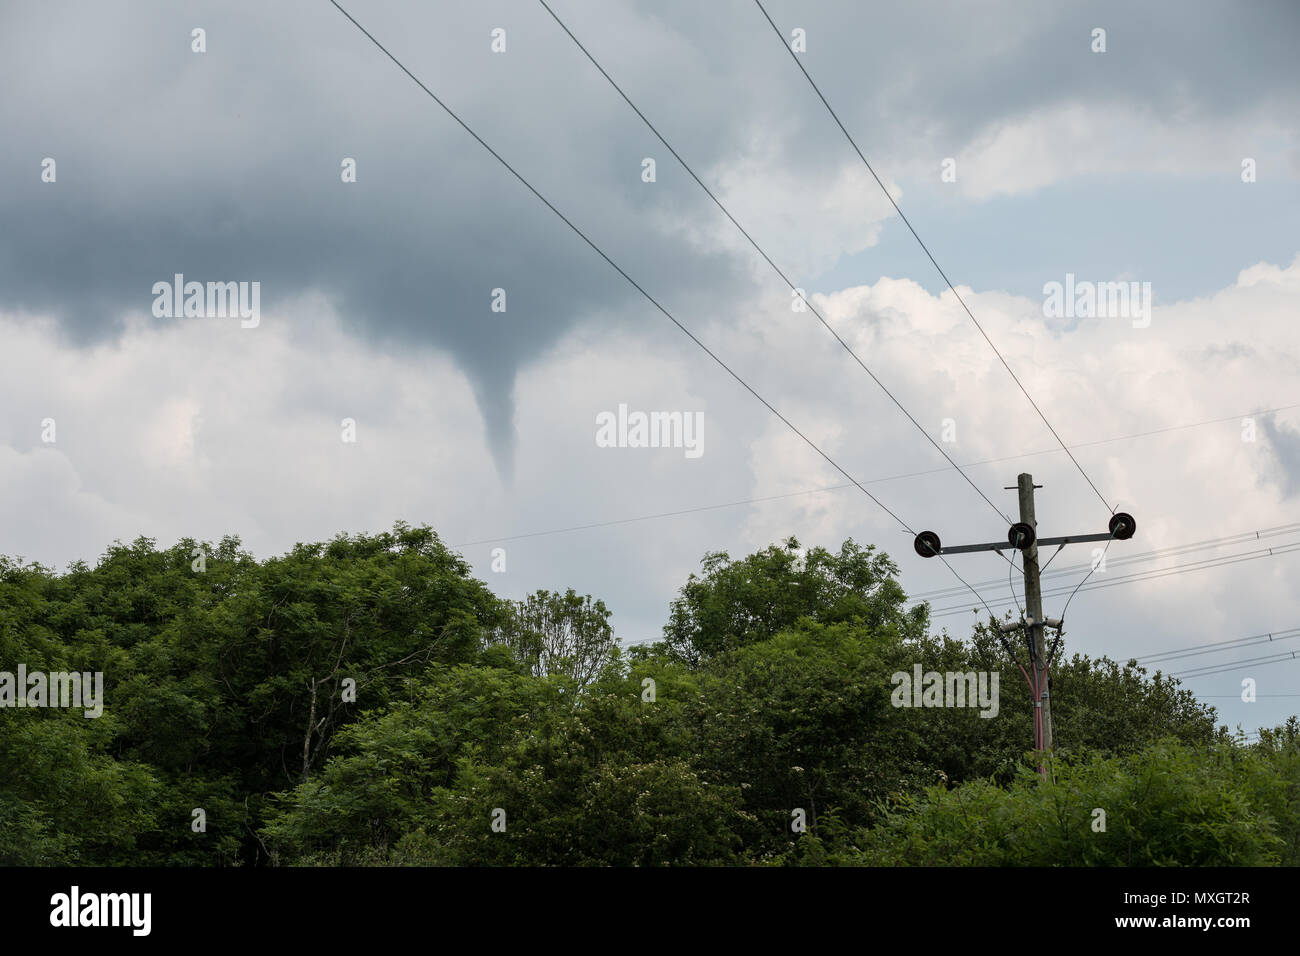 Pembrokeshire, Wales, UK. 4th Jun, 2018. A Tornado / funnel cloud spotted in Pembrokeshire around lunchtime on the 4th June 2018. Touched down in fields near to Neyland, Pembrokeshire, Wales, UK Credit: Drew Buckley/Alamy Live News Stock Photo